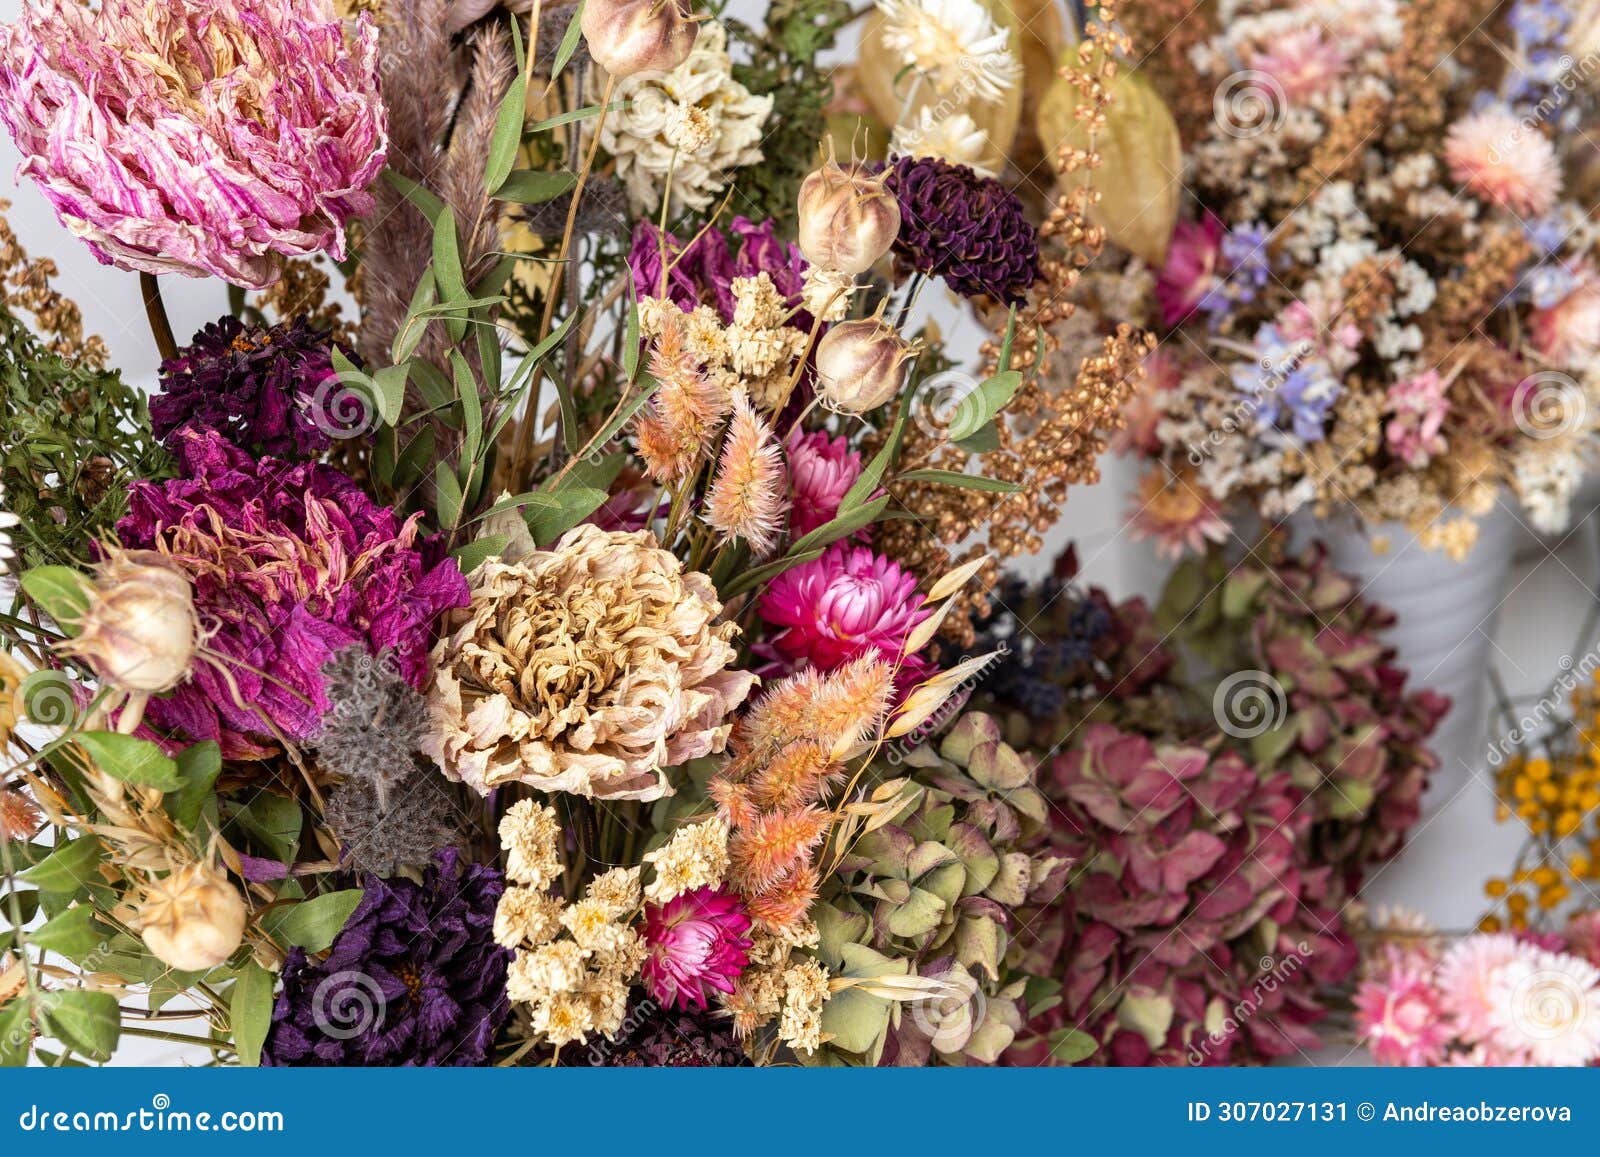 dried flowers arrangement close up. sustainable floristry. home decor with dried flowers.